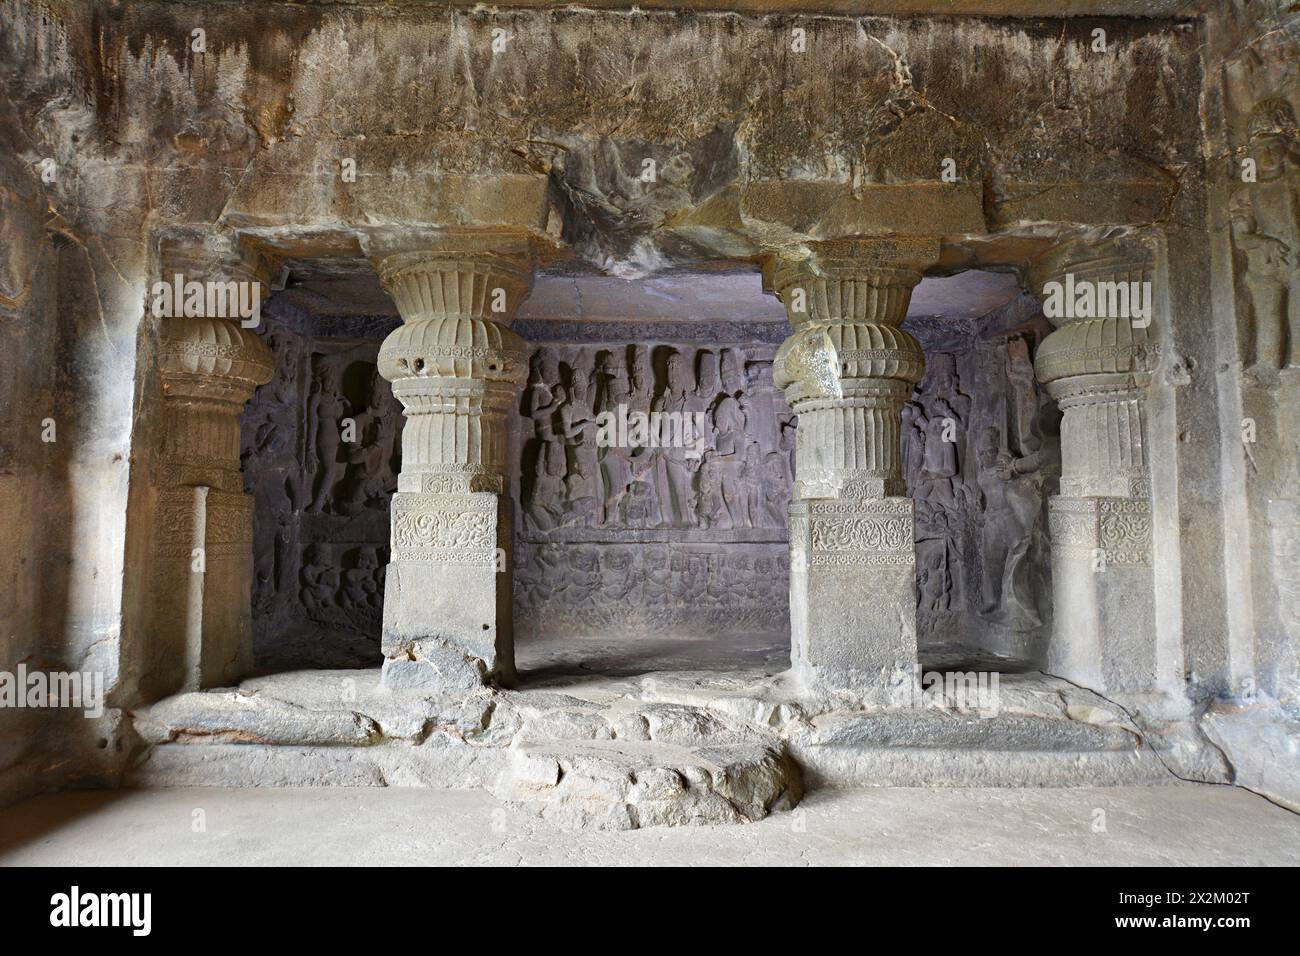 Ellora Brahmanical Caves: Cave No 21 Kalyanasundarmurti- Marriage of Siva and Parvati in the sub-shrine to the left of the main hall - central image. Stock Photo